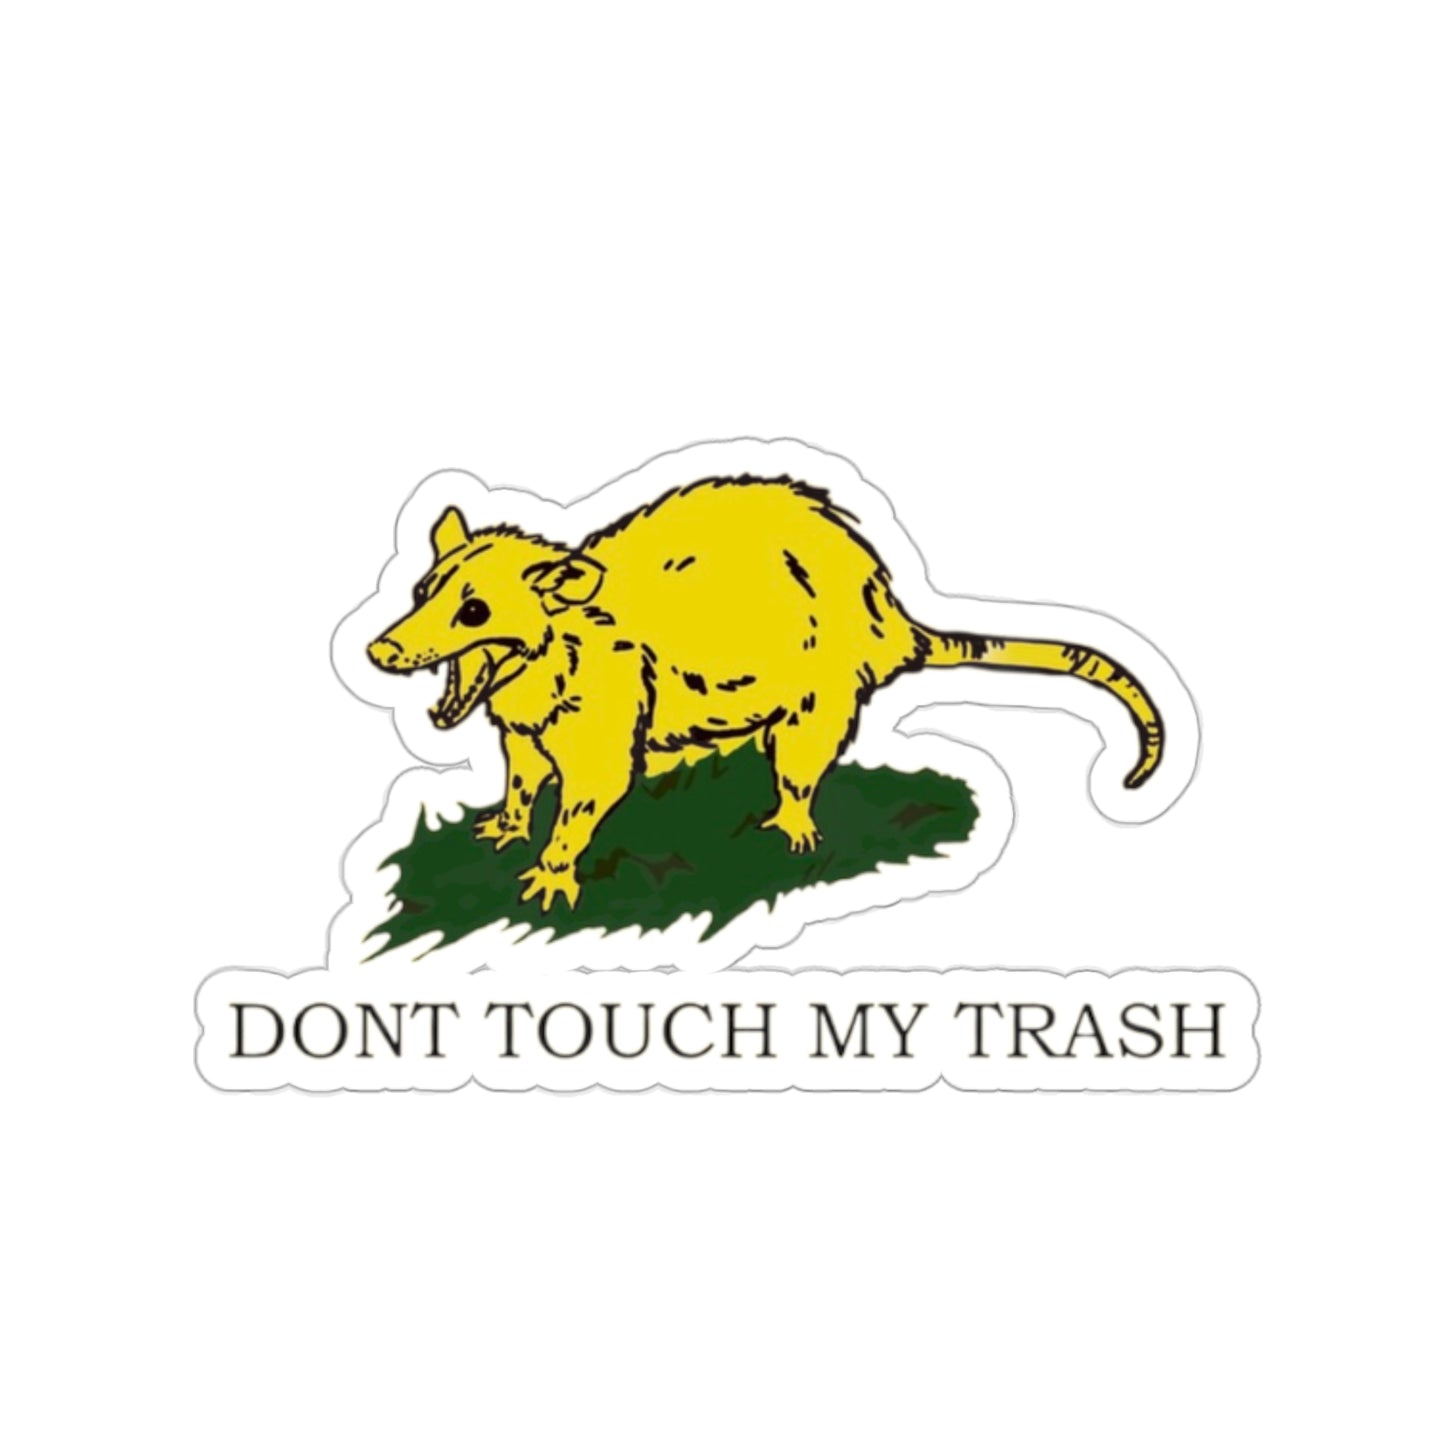 DONT TOUCH MY TRASH